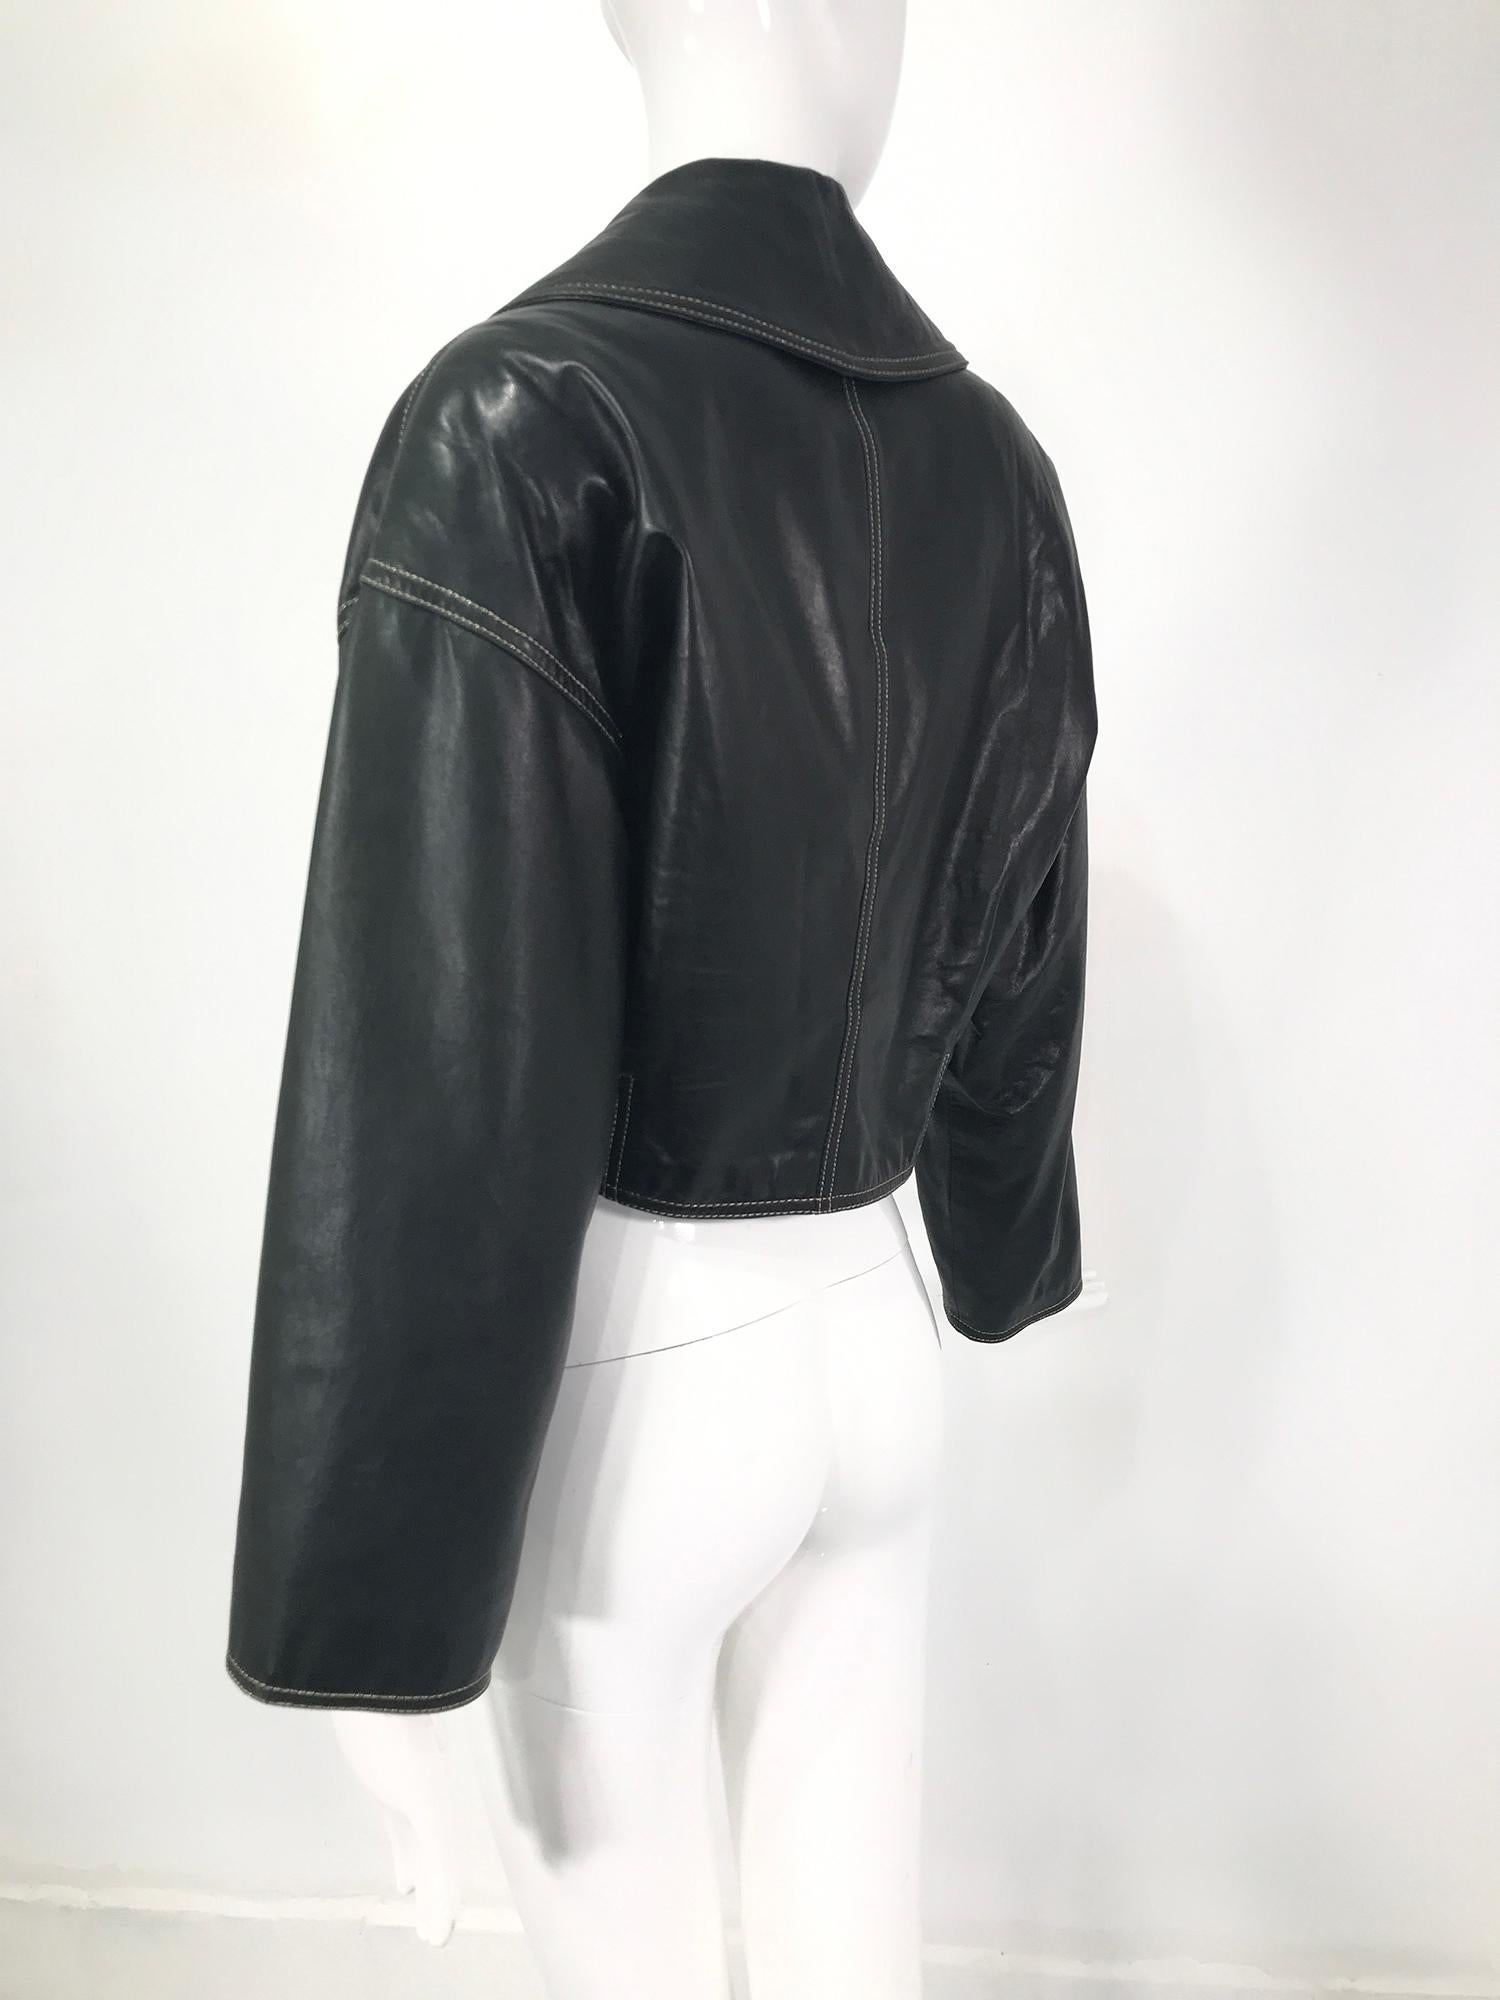 Genny Black Leather Bomber Jacket With Rhinestone Buttons & Gold Stitching 1980s In Good Condition For Sale In West Palm Beach, FL